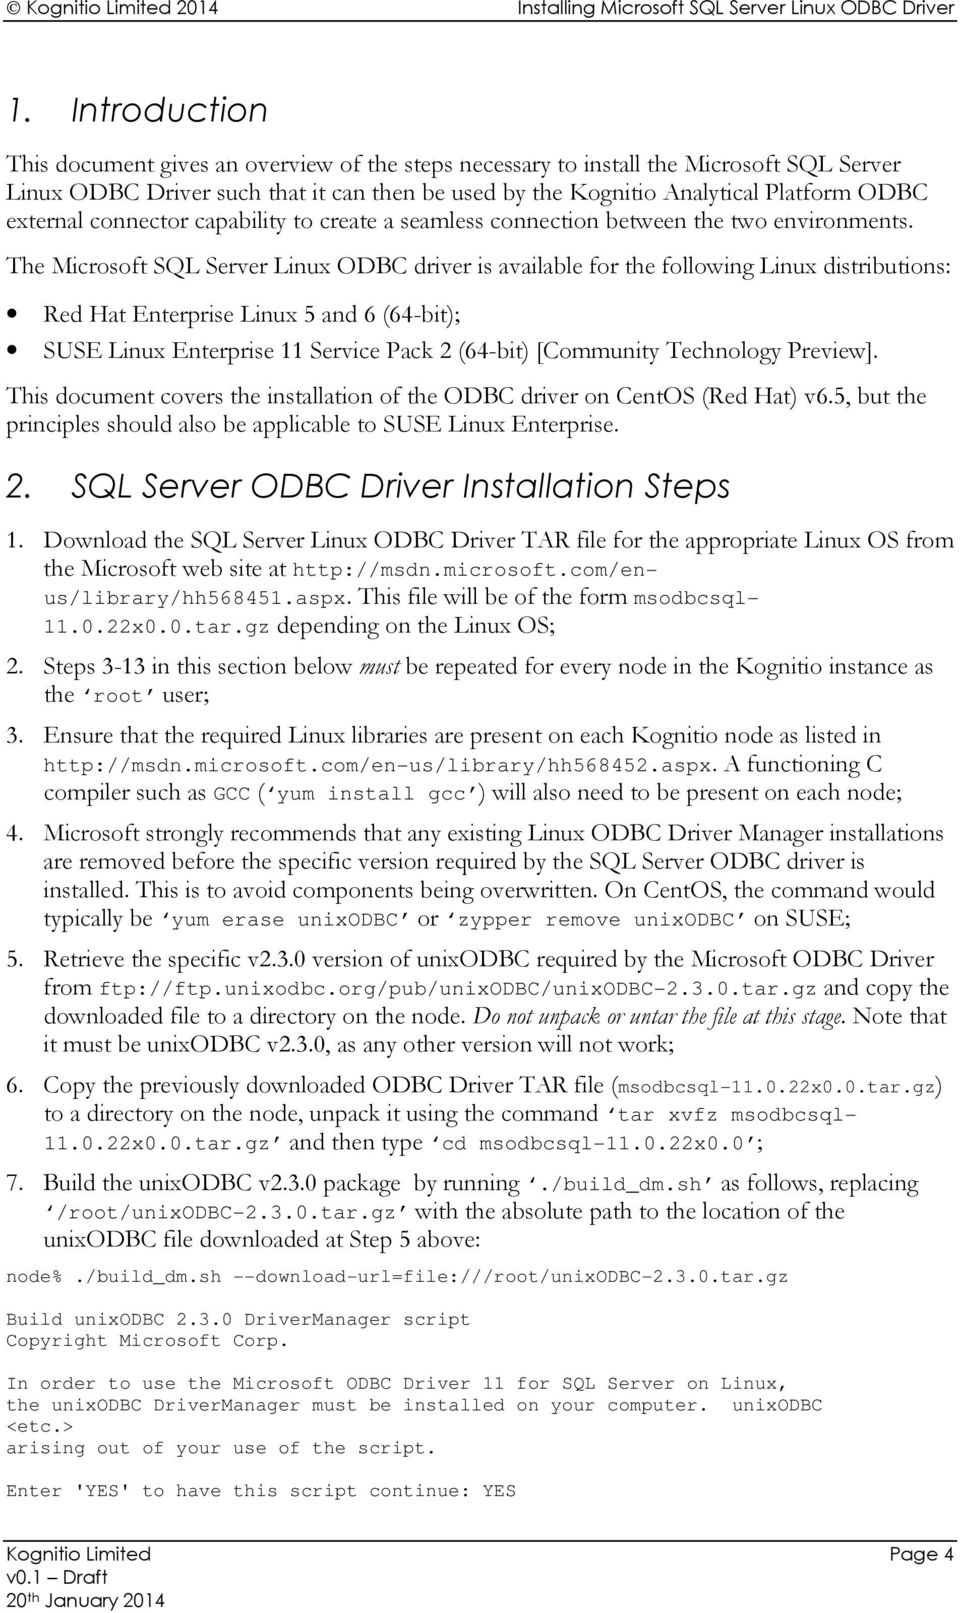 The Microsoft SQL Server Linux ODBC driver is available for the following Linux distributions: Red Hat Enterprise Linux 5 and 6 (64-bit); SUSE Linux Enterprise 11 Service Pack 2 (64-bit) [Community